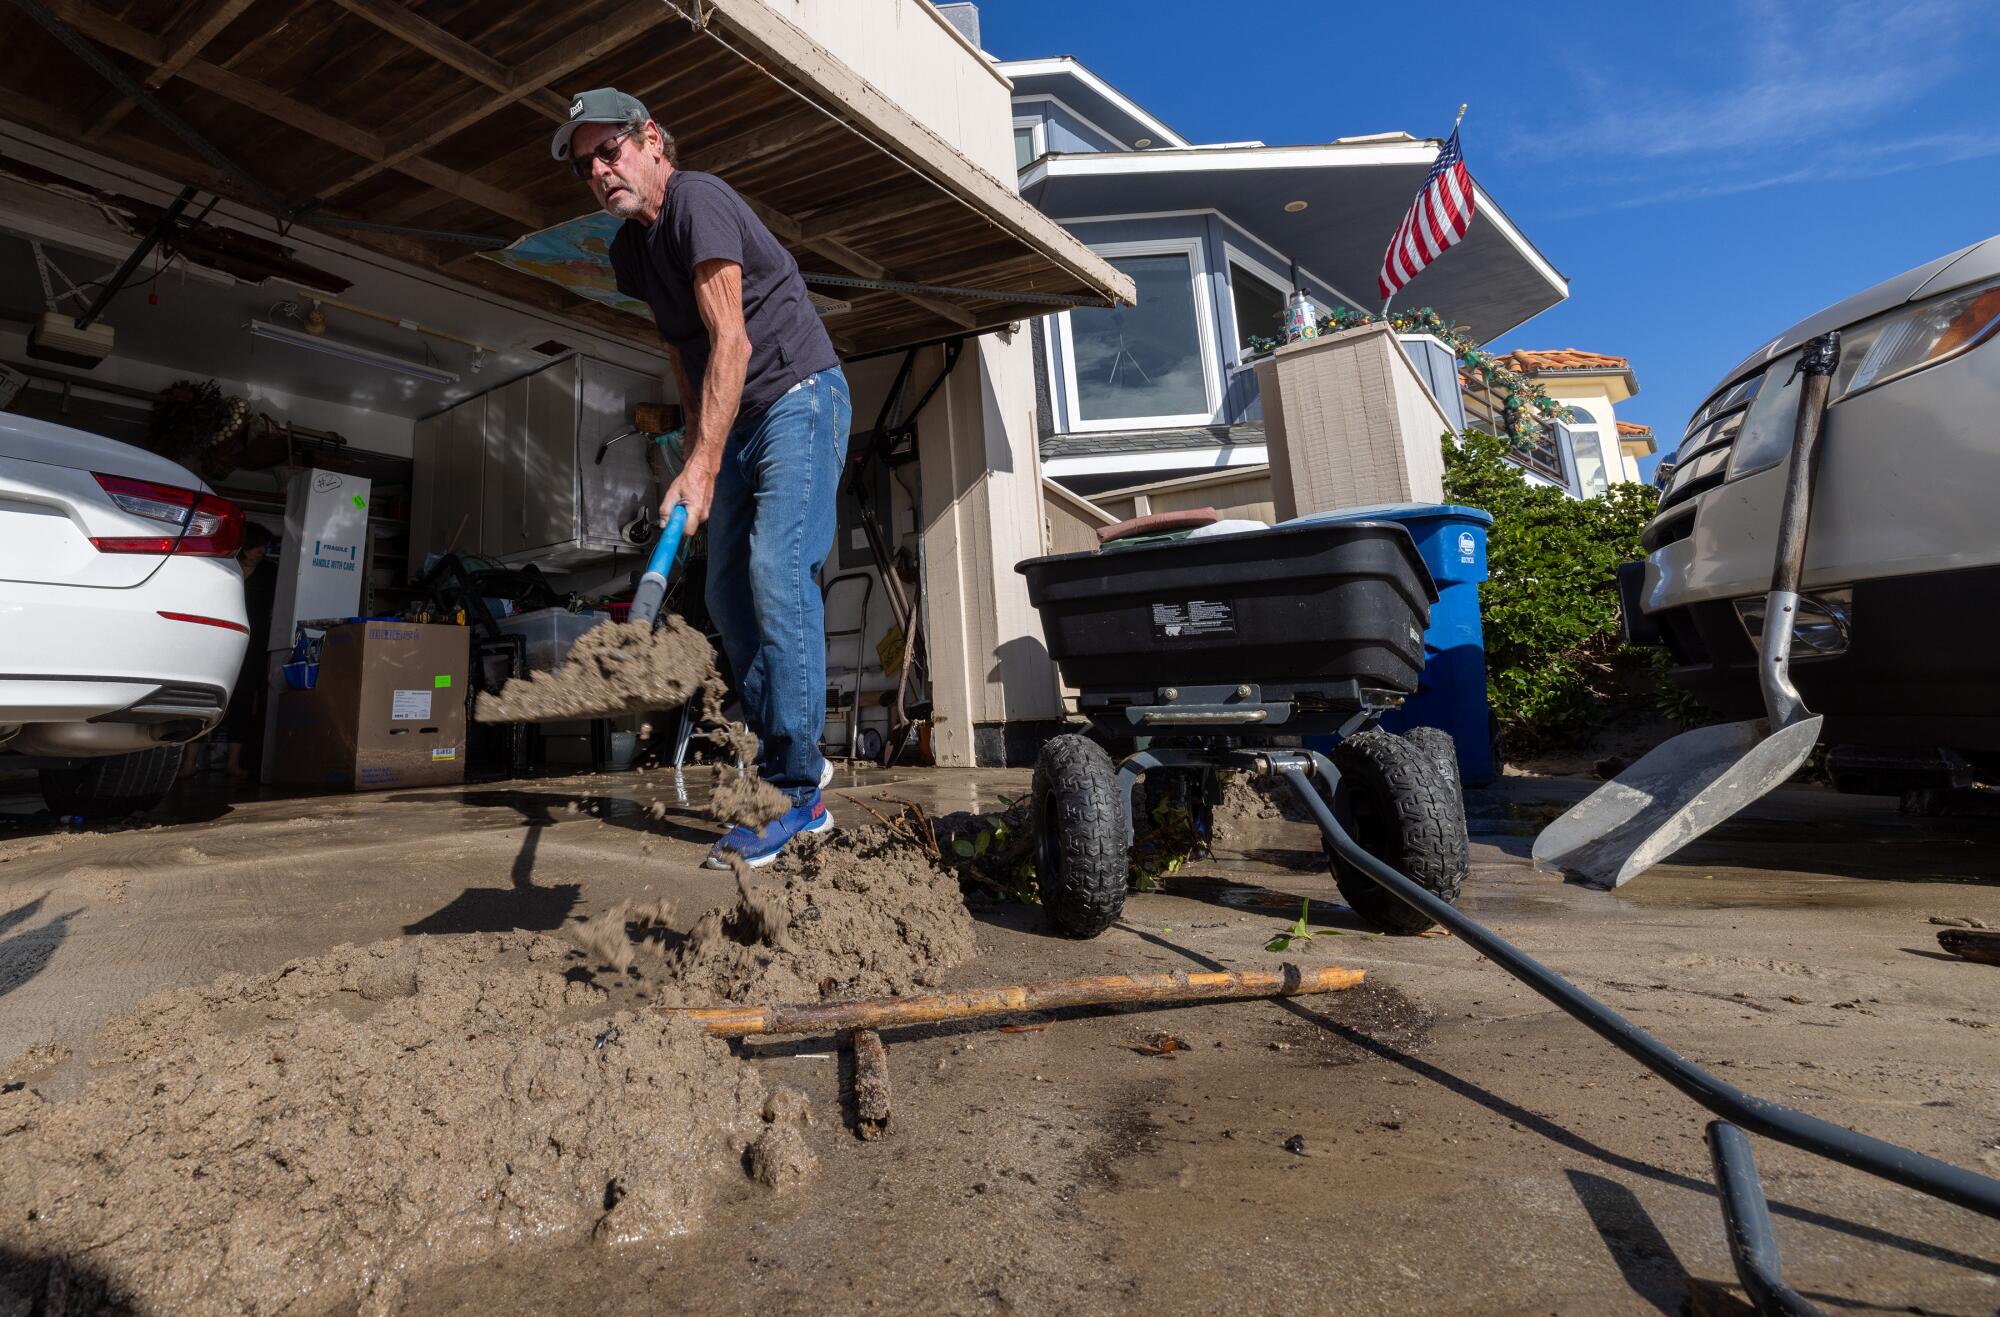 Pierpont resident Ted Teetsel shovels sand out of neighbor Linda Fisher's garage on Greenock Lane after the area was flooded.